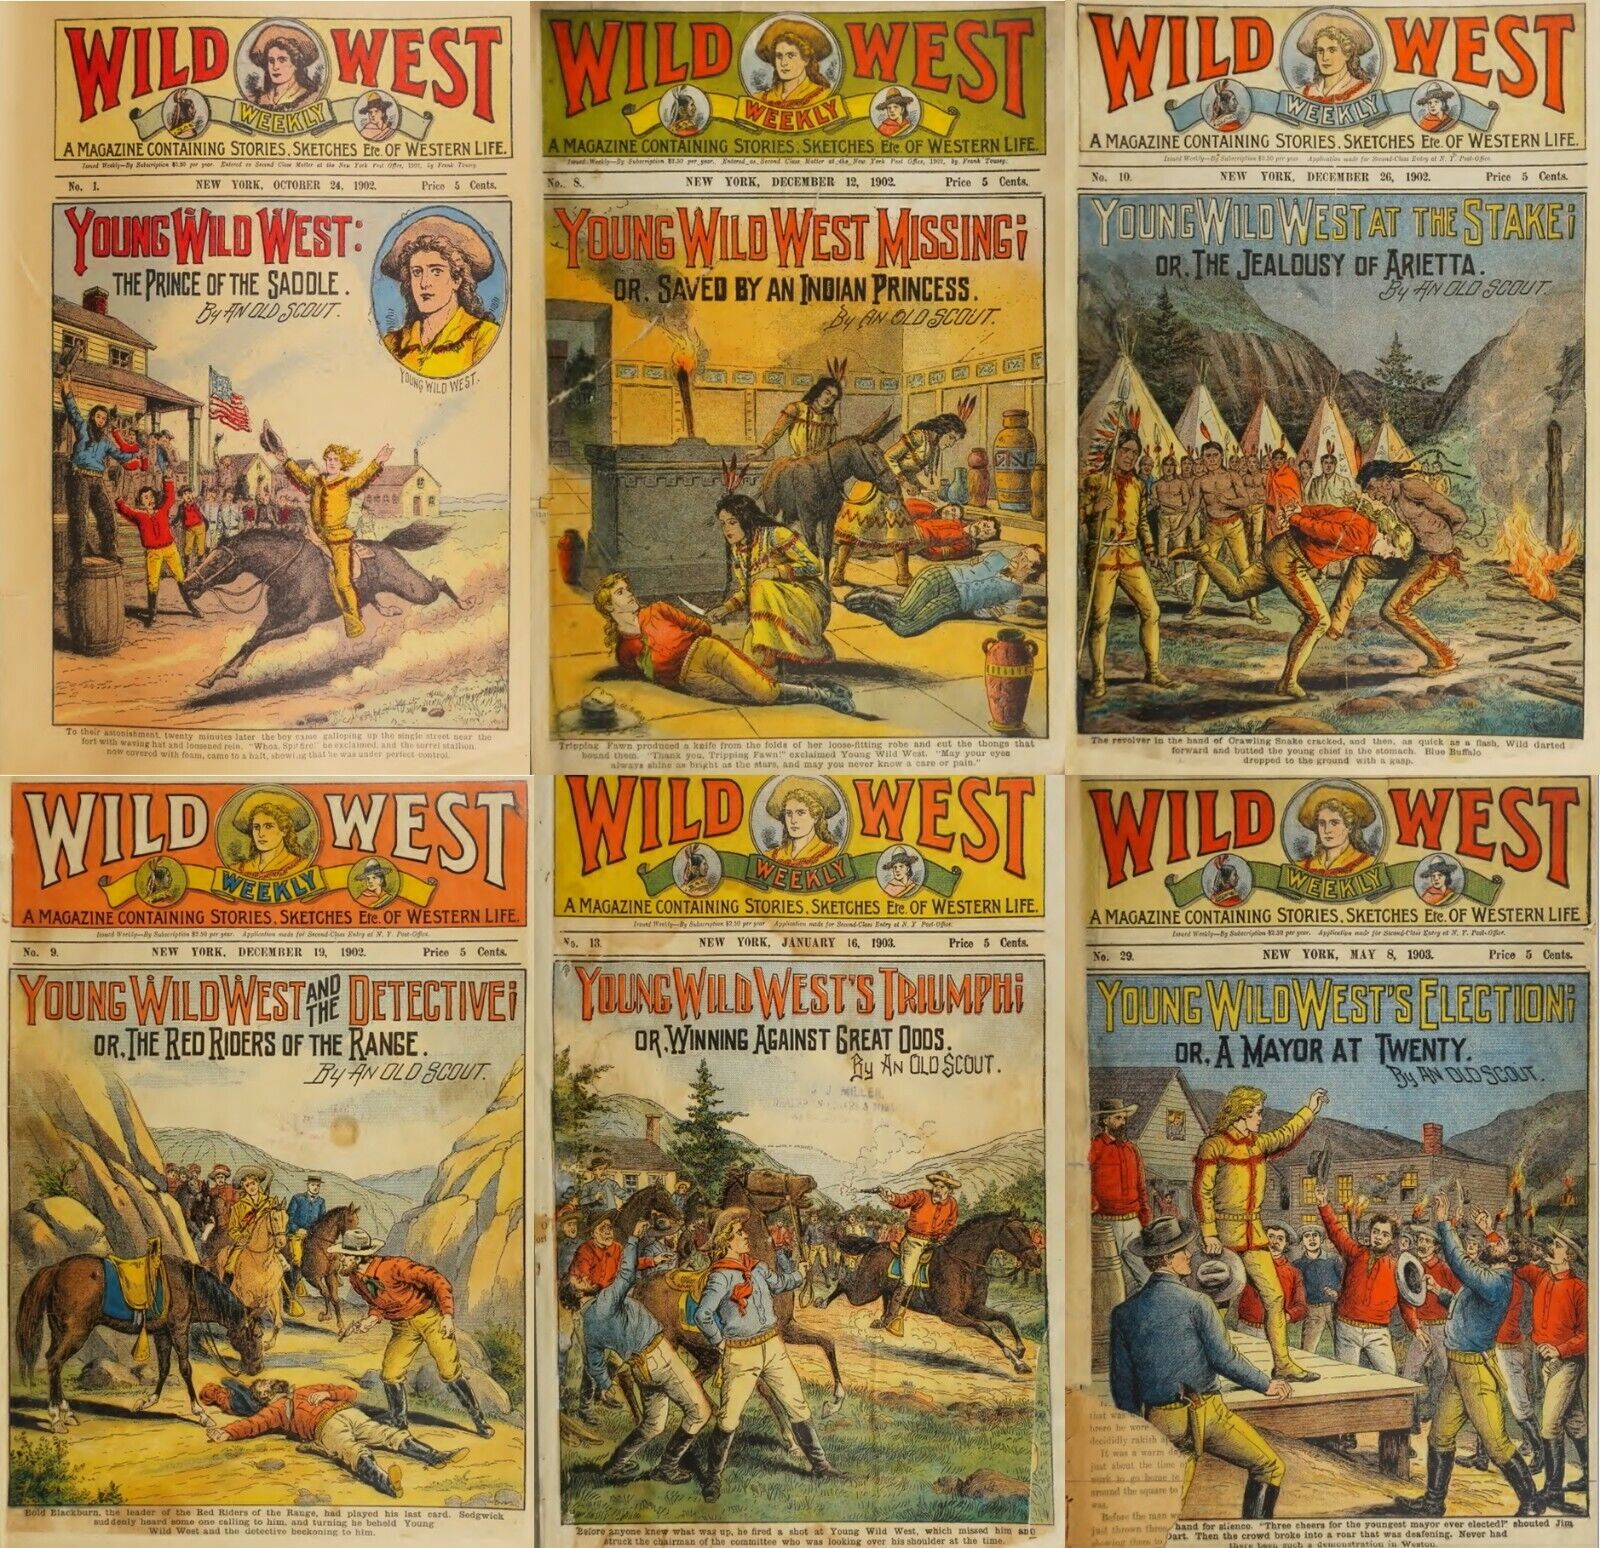 93 OLD ISSUES OF WILD WEST WEEKLY - AMERICAN HEROINE FRONTIER MAGAZINE ON DVD